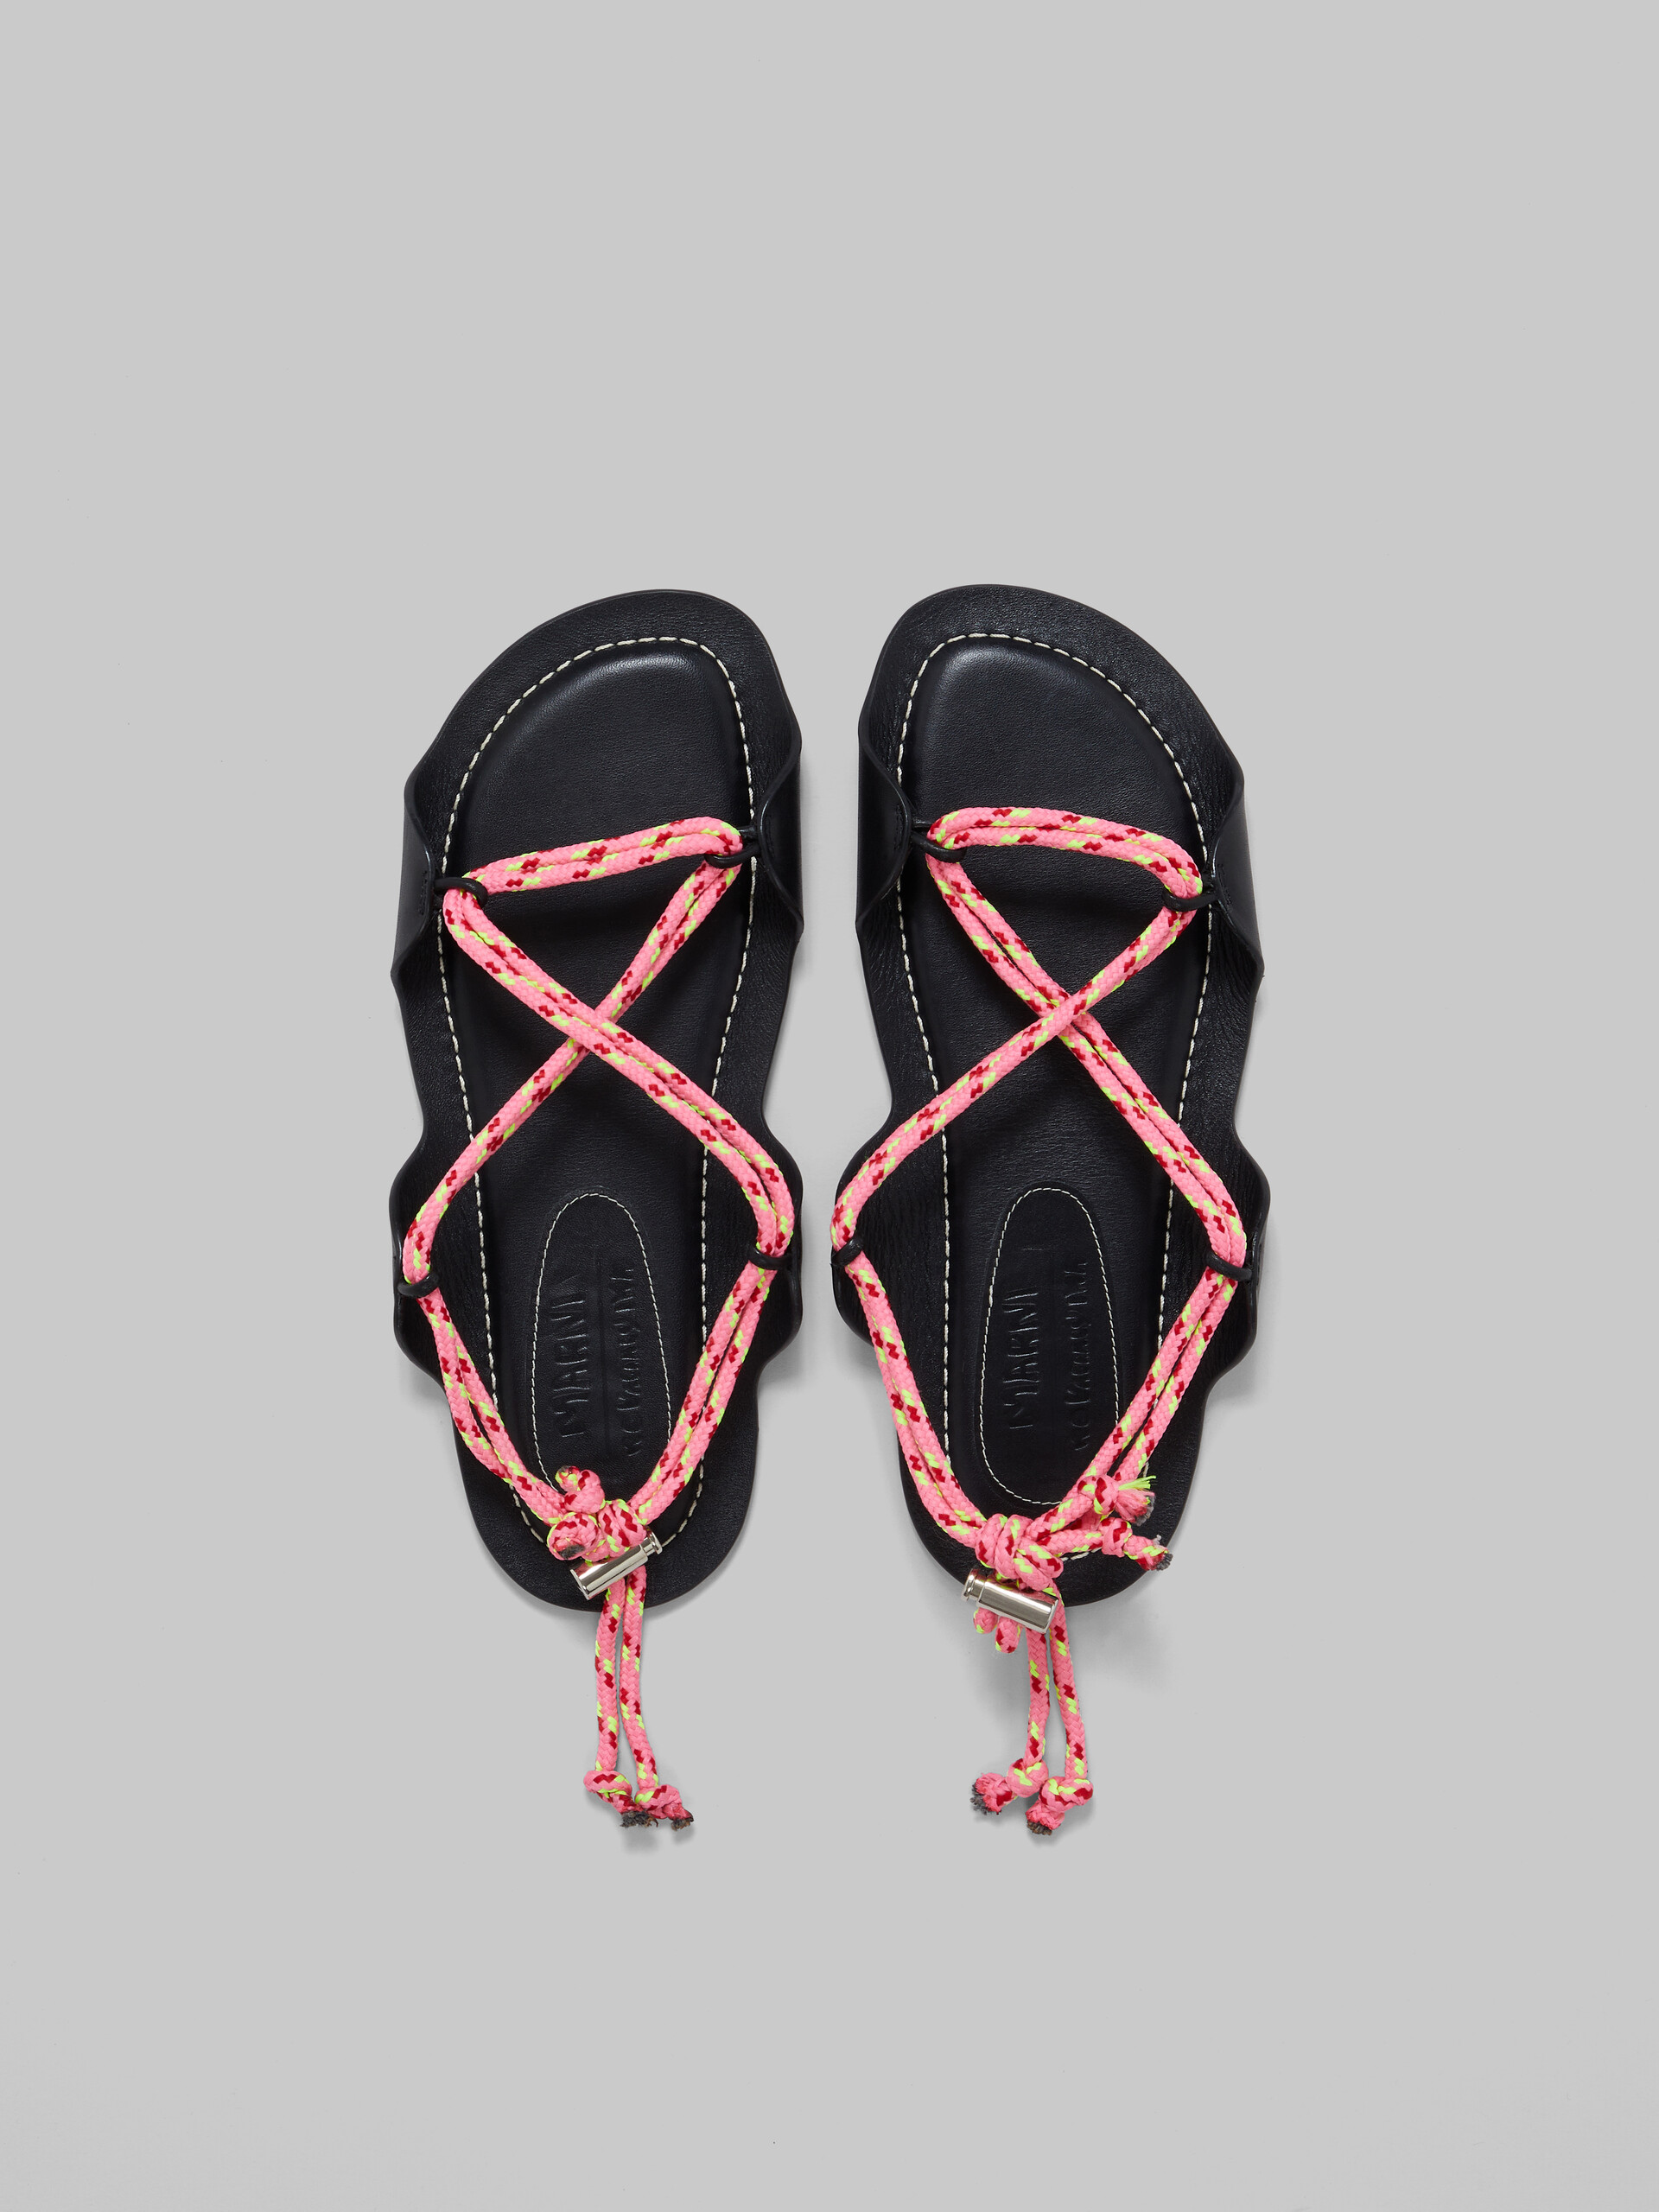 Marni x No Vacancy Inn - Black leather sandals with multicolour rope - Sandals - Image 4